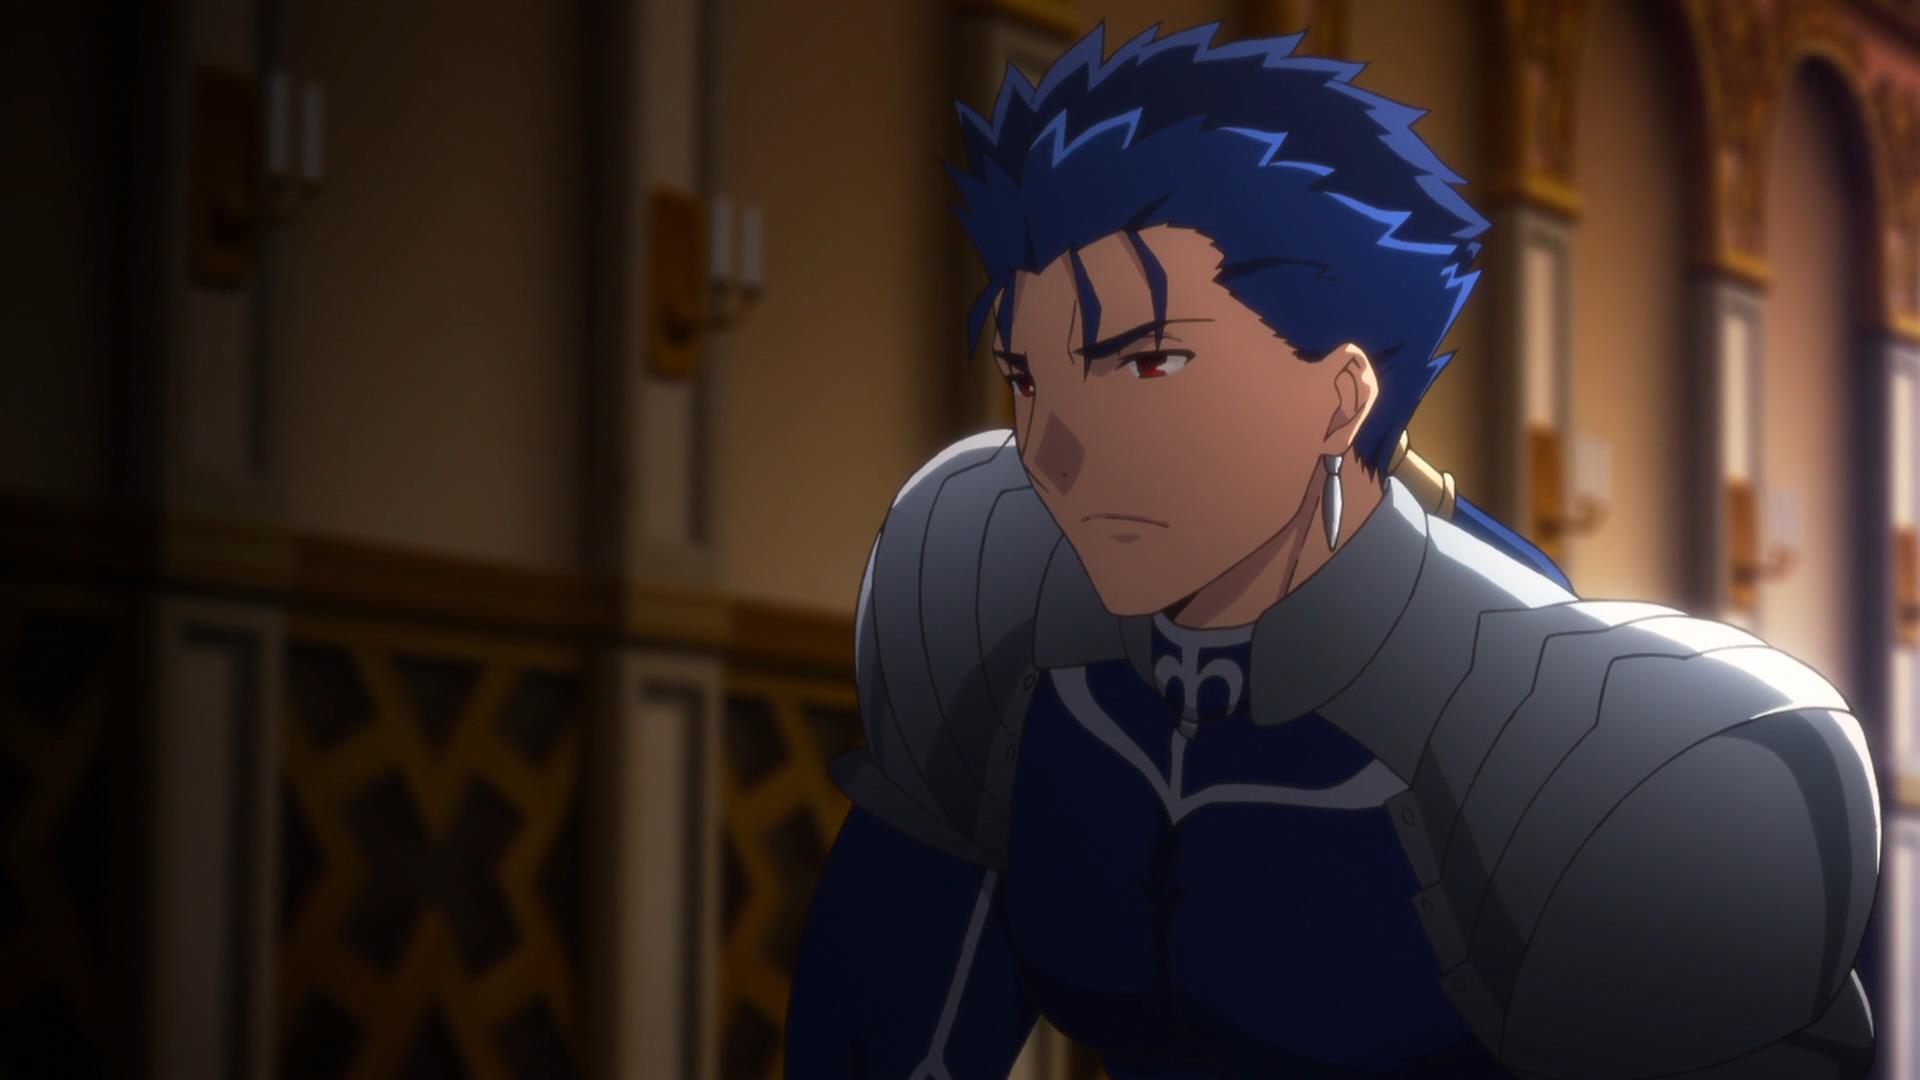 Fate/stay night Unlimited Blade Works, Episode 1: Saving Everyone